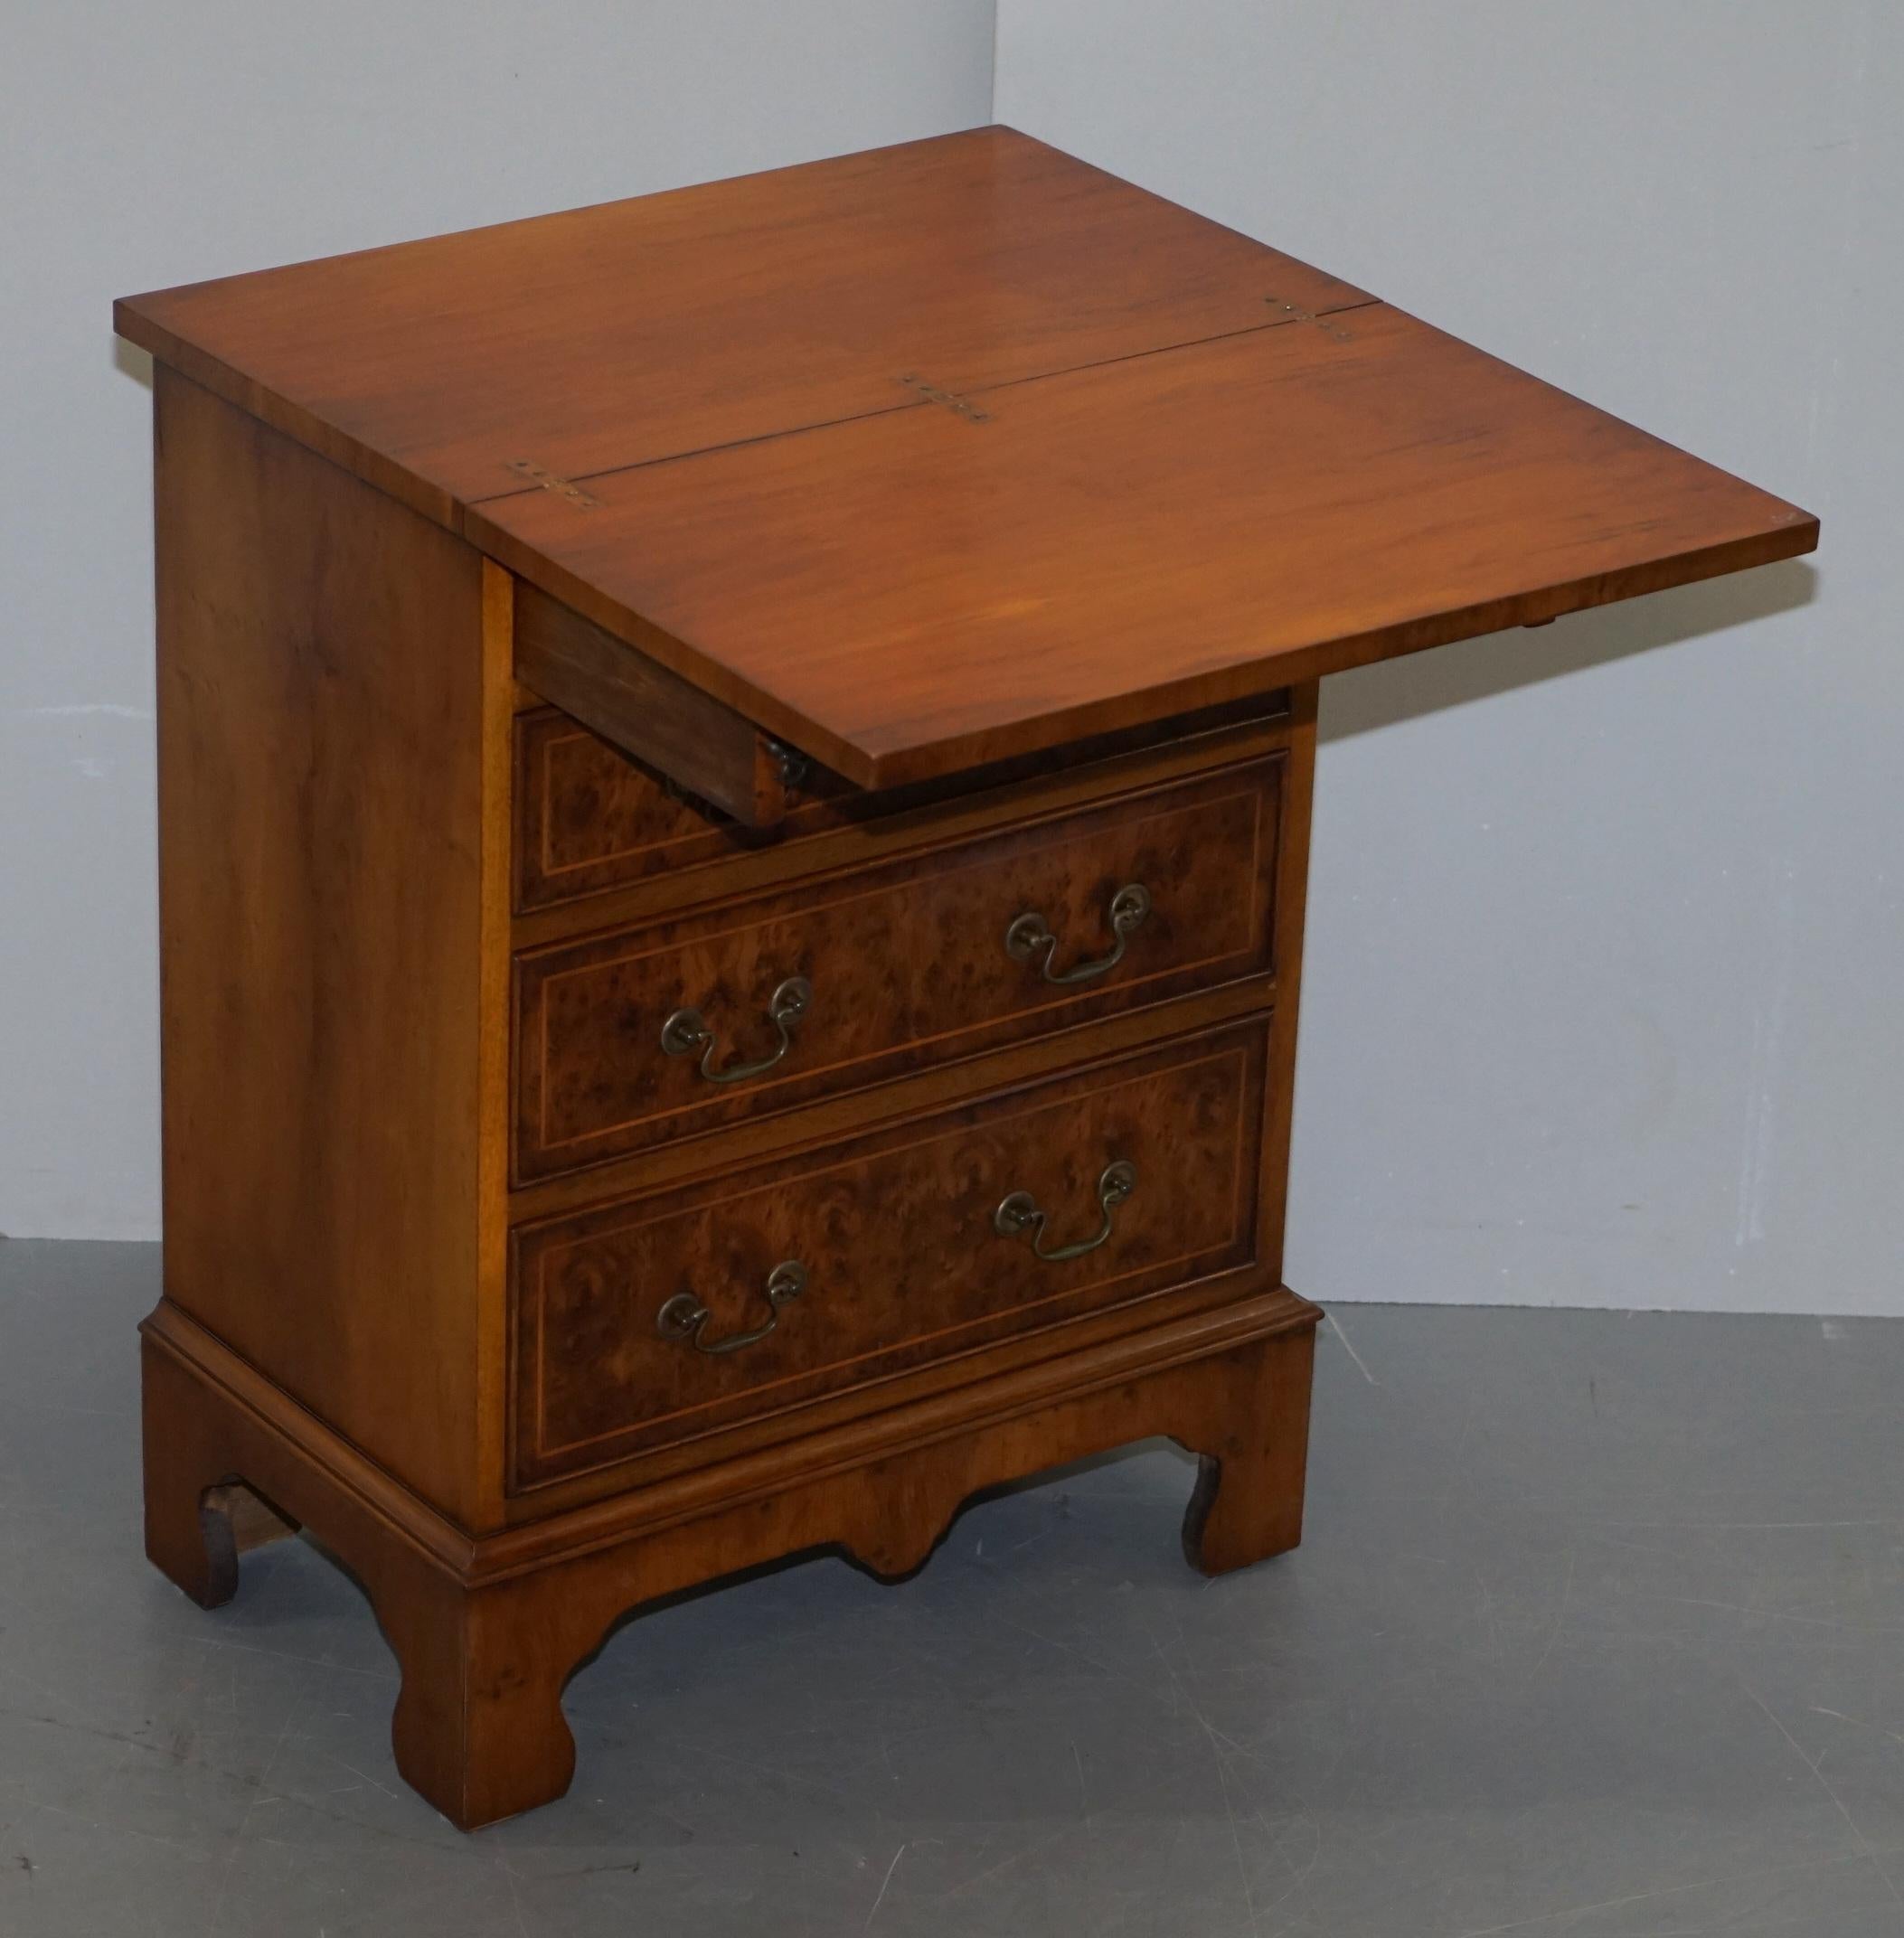 Sublime Burr Walnut Side Table Sized Chest of Drawers with Butlers Serving Tray 10